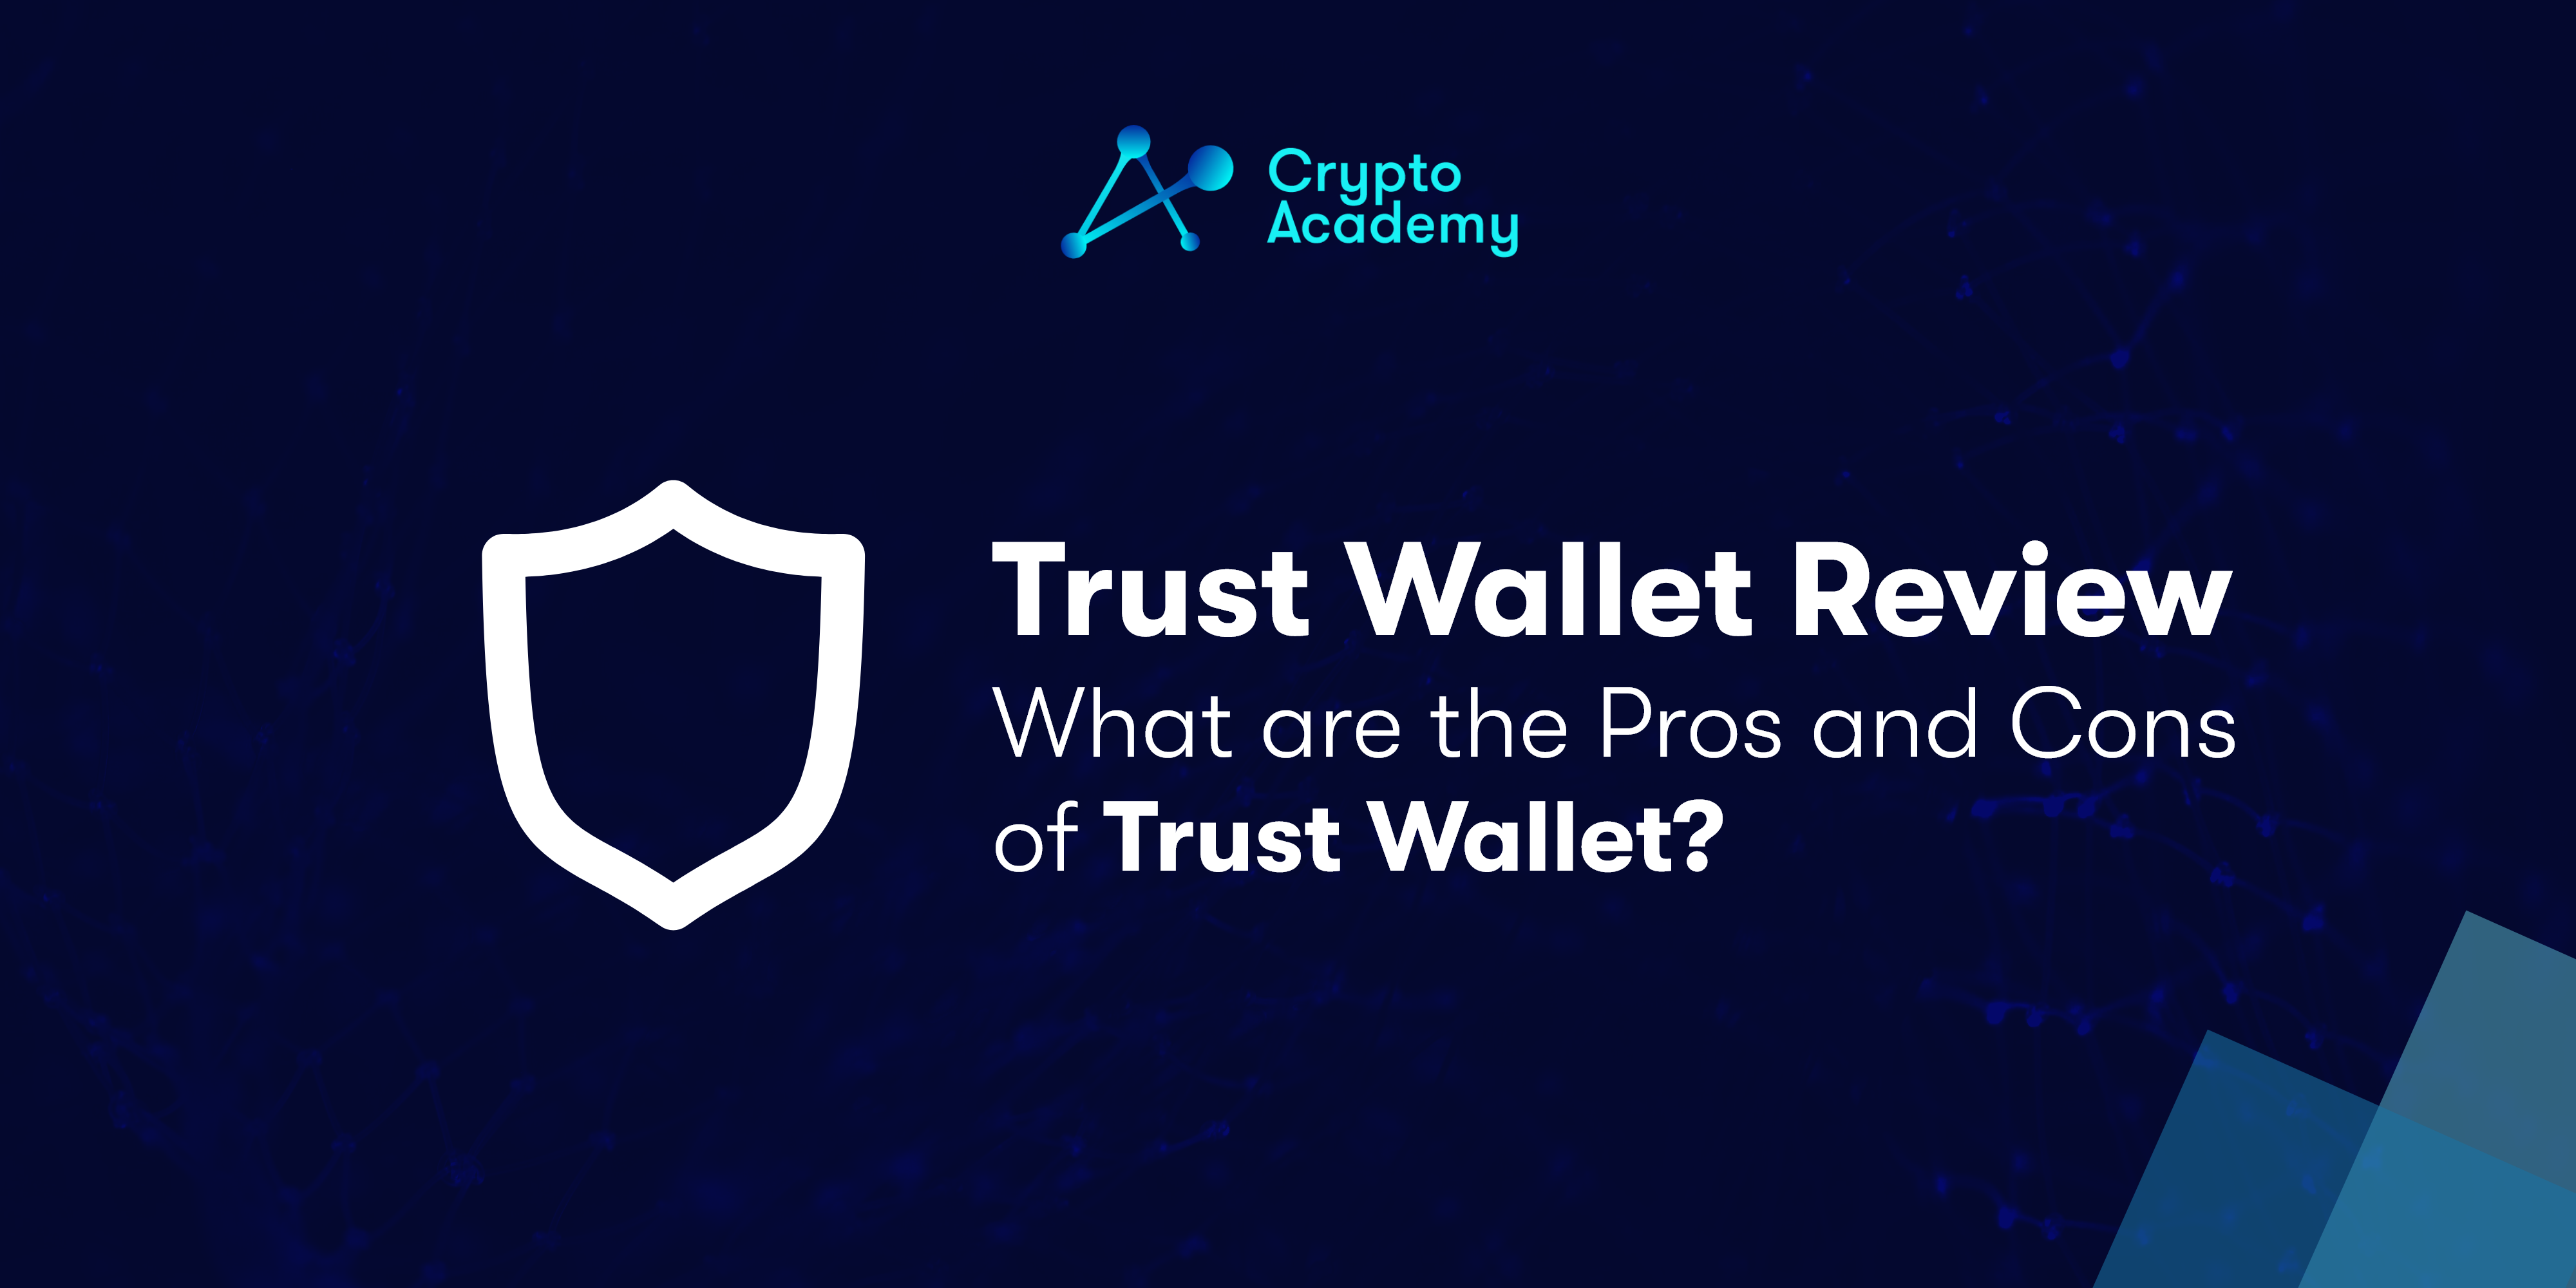 Trust Wallet Review – What are the Pros and Cons of Trust Wallet?